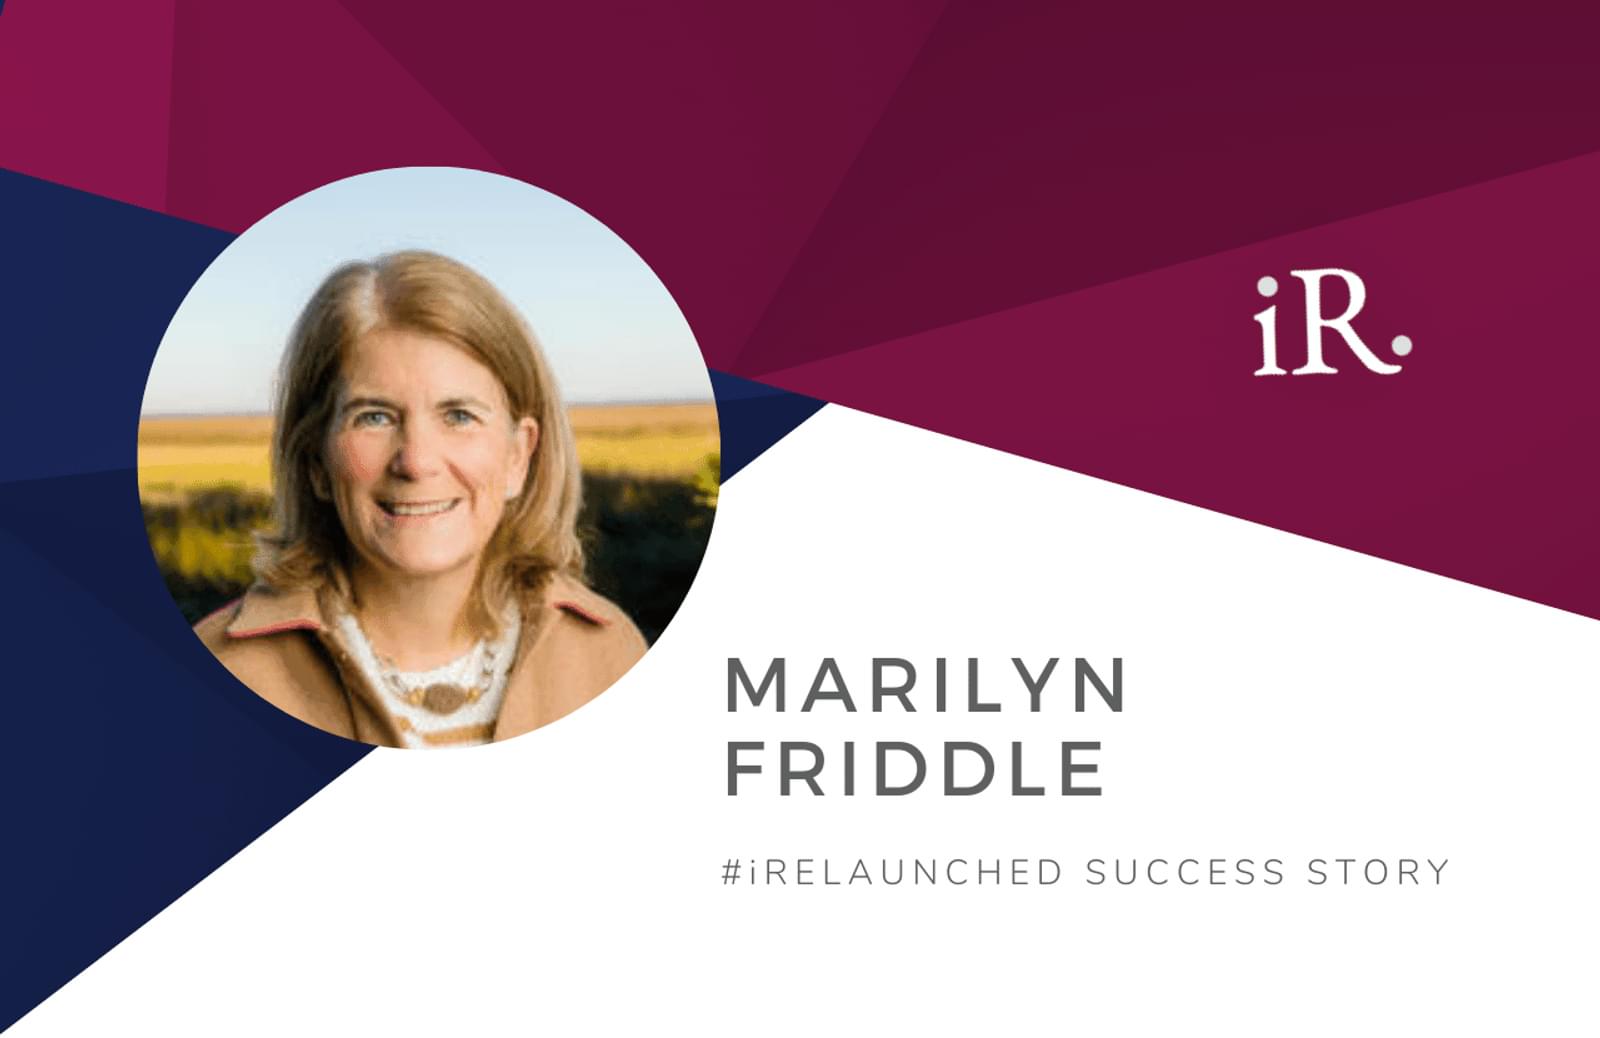 Marilyn Friddle's headshot and the text #iRelaunched Success Story along with the iRelaunch logo.  A navy and maroon geometric textured background intersect behind Marilyn's headshot.